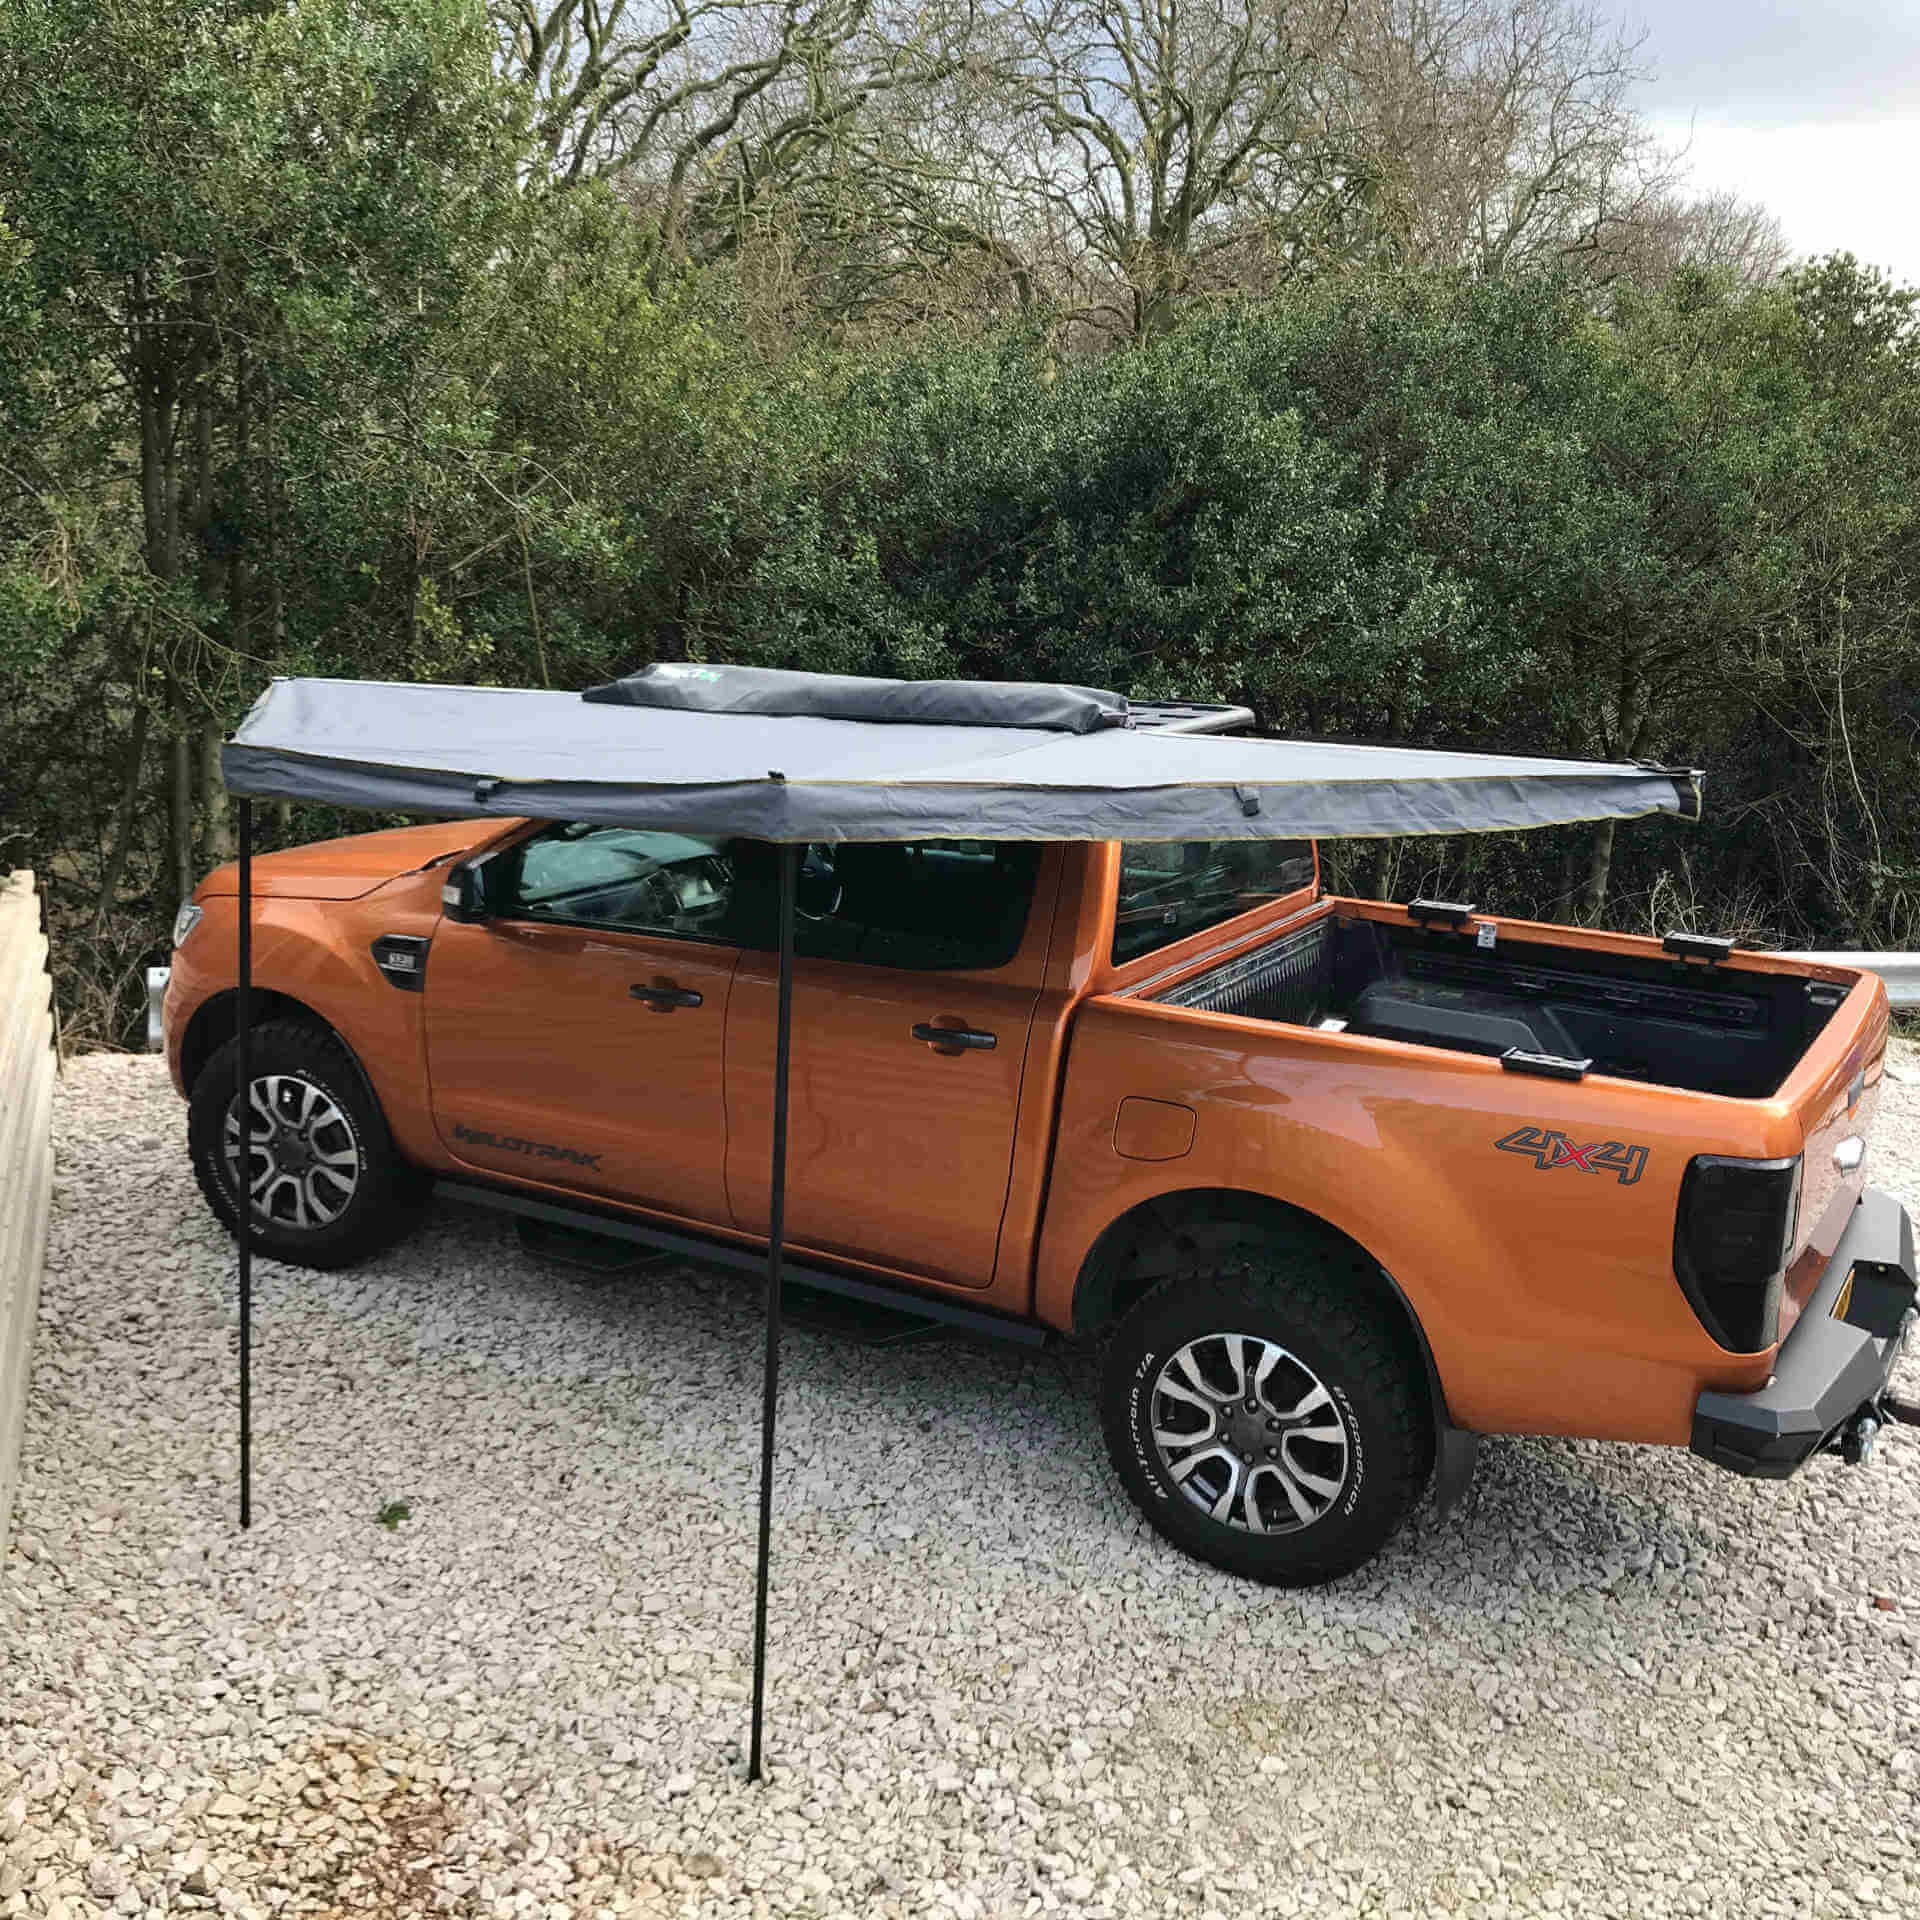 180 Degree Overland Expedition Fold-Out Camping Vehicle Rear Awning -  - sold by Direct4x4